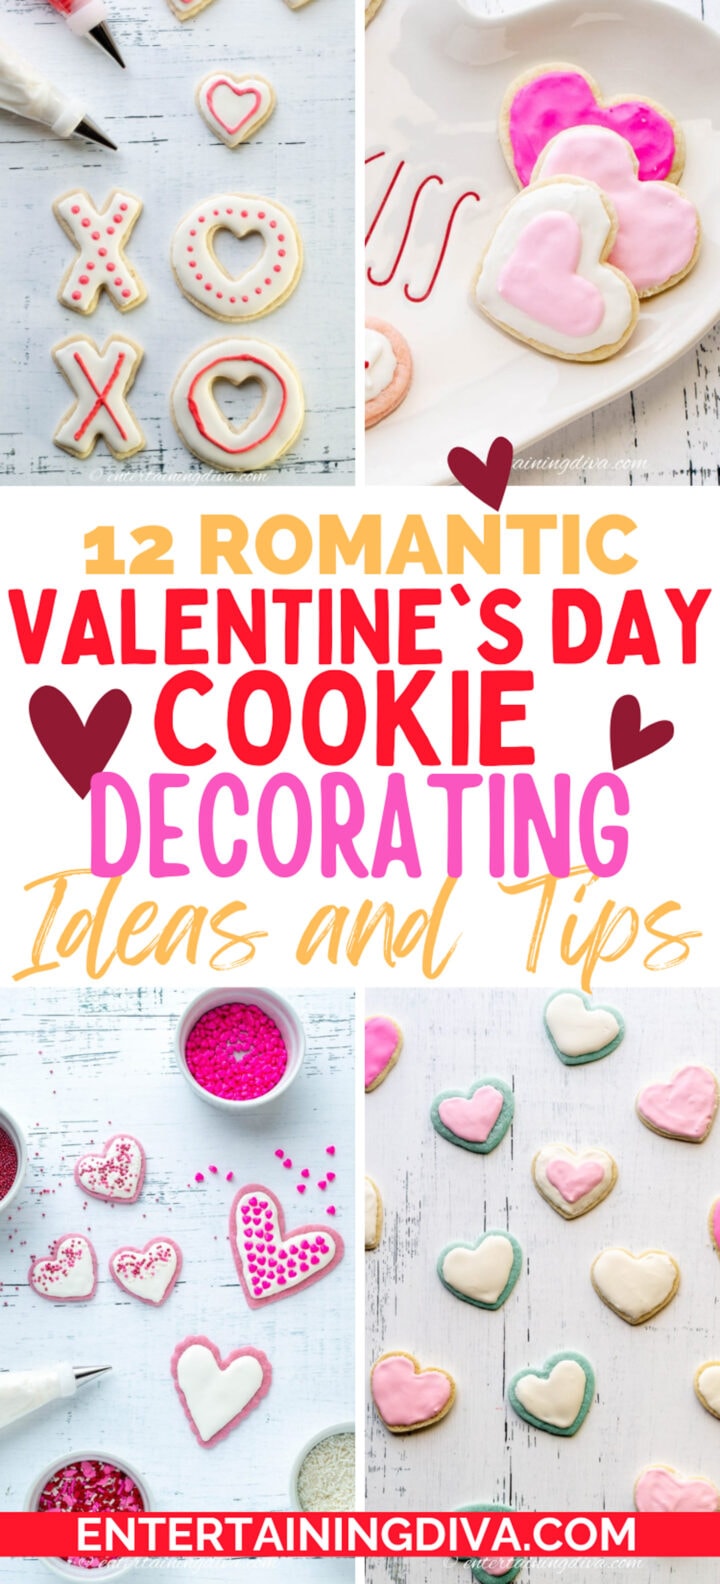 12 Easy Valentine Cookie Decorating Ideas That Anyone Can Do